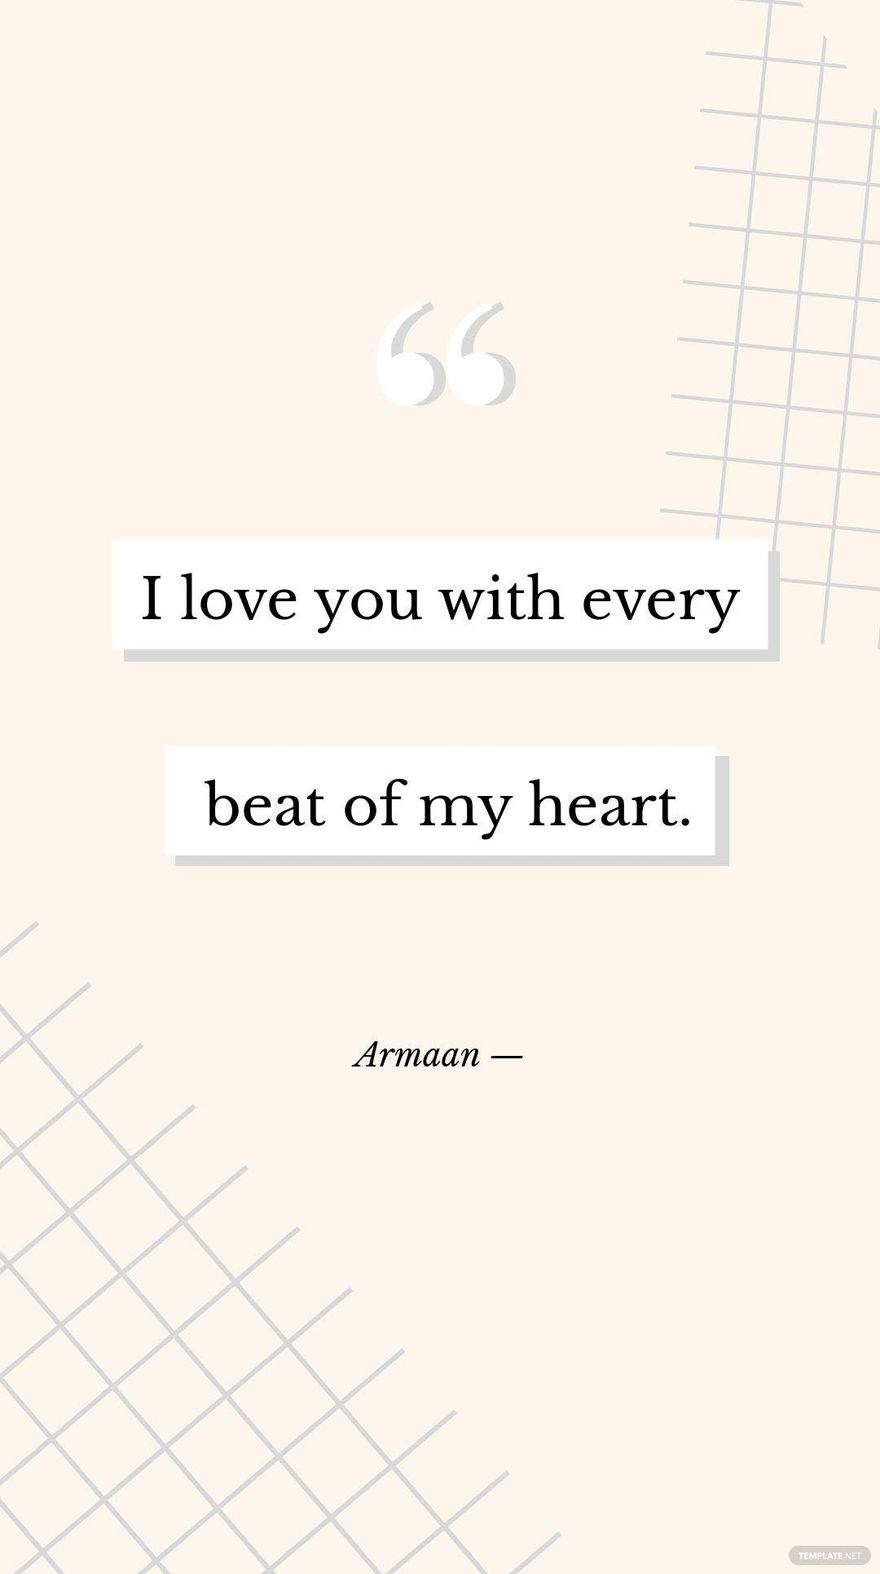 Armaan — “I love you with every beat of my heart.”